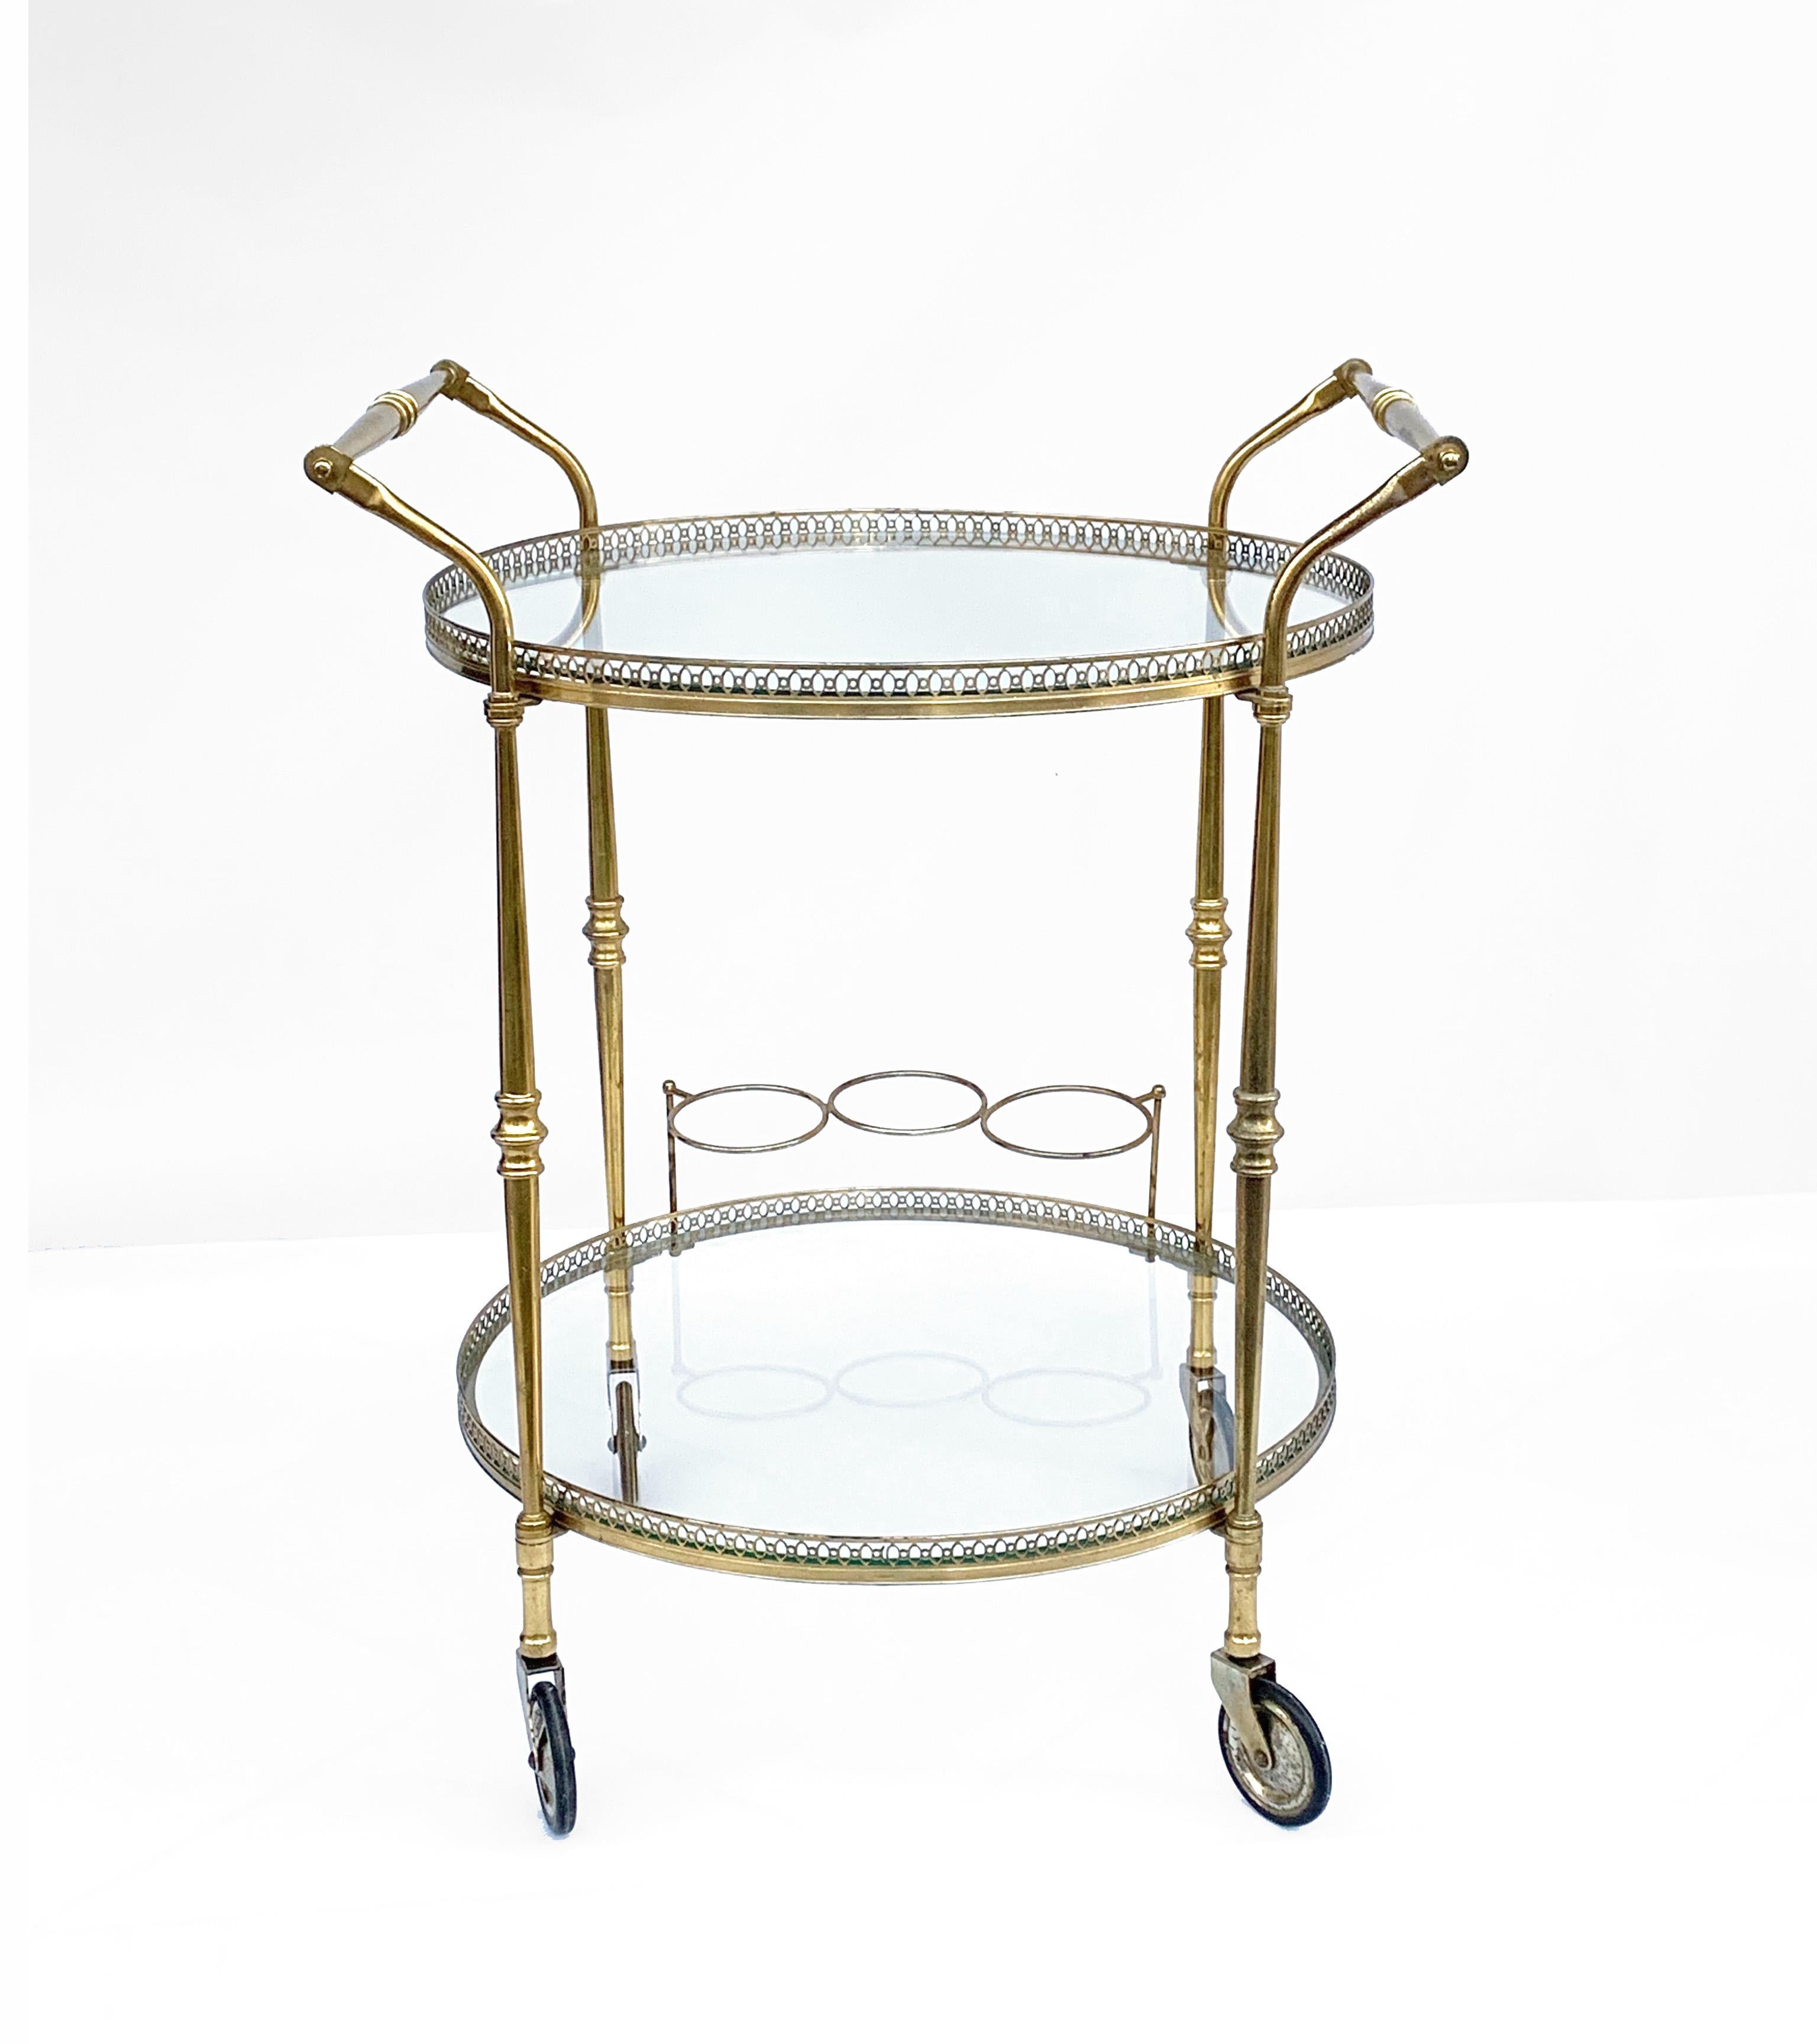 Maison Baguès superb two-level bar trolley. Made of high quality brass and bronze.
With bottle holder.
 